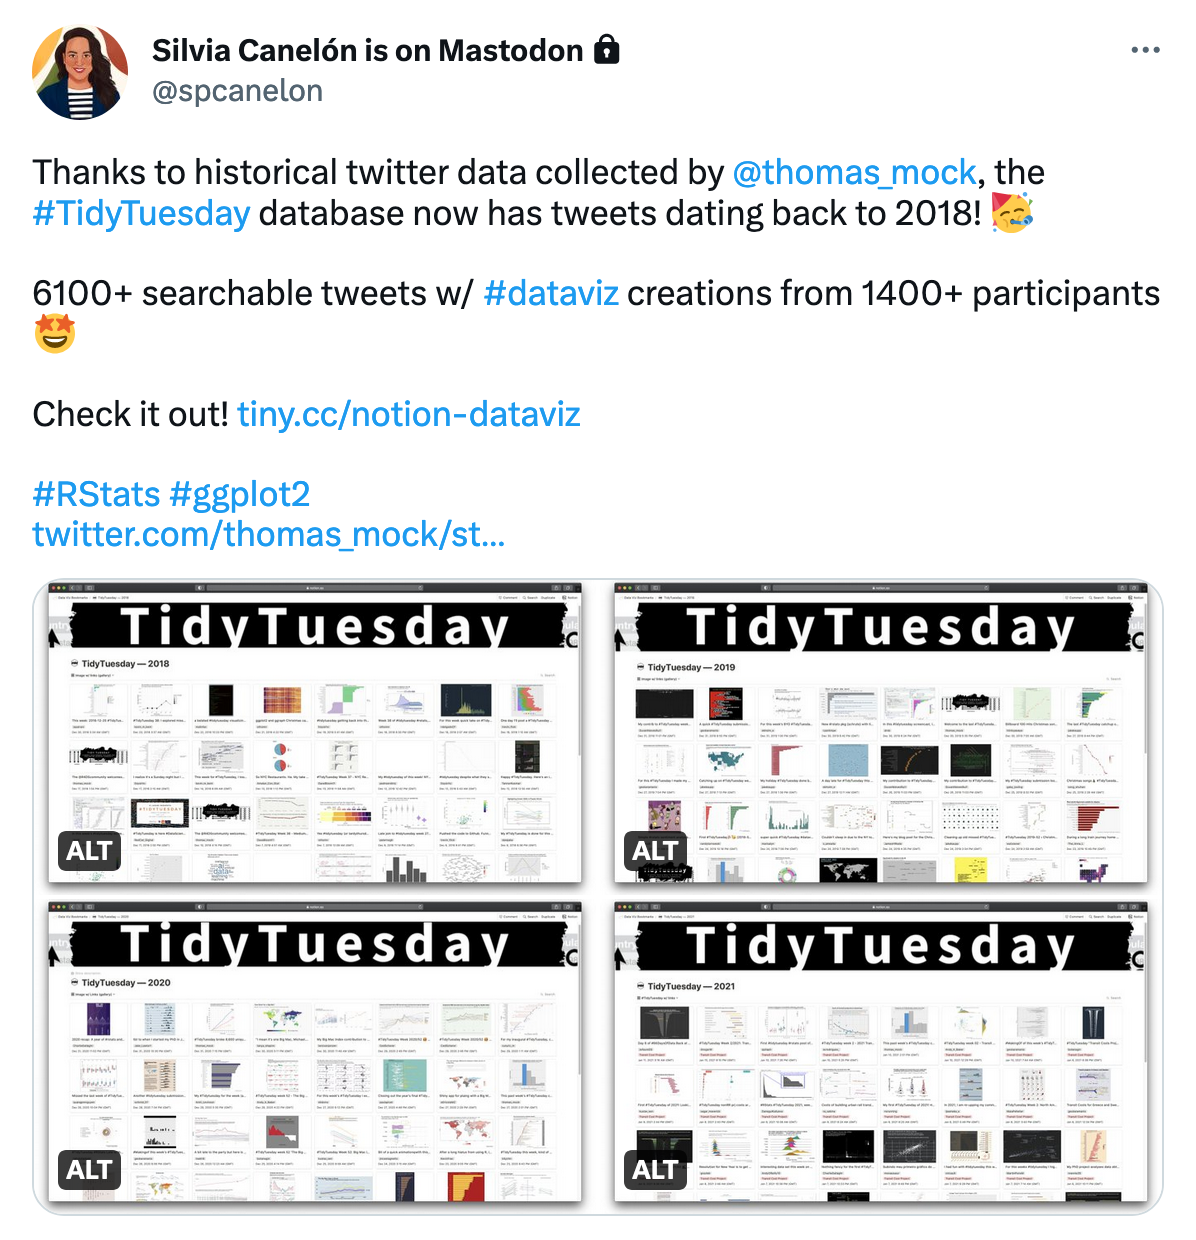 Thanks to historical twitter data collected by @thomas_mock, the #TidyTuesday database now has tweets dating back to 2018! 6100+ searchable tweets w/ #dataviz creations from 1400+ participants 🤩 Check it out! http://tiny.cc/notion-dataviz